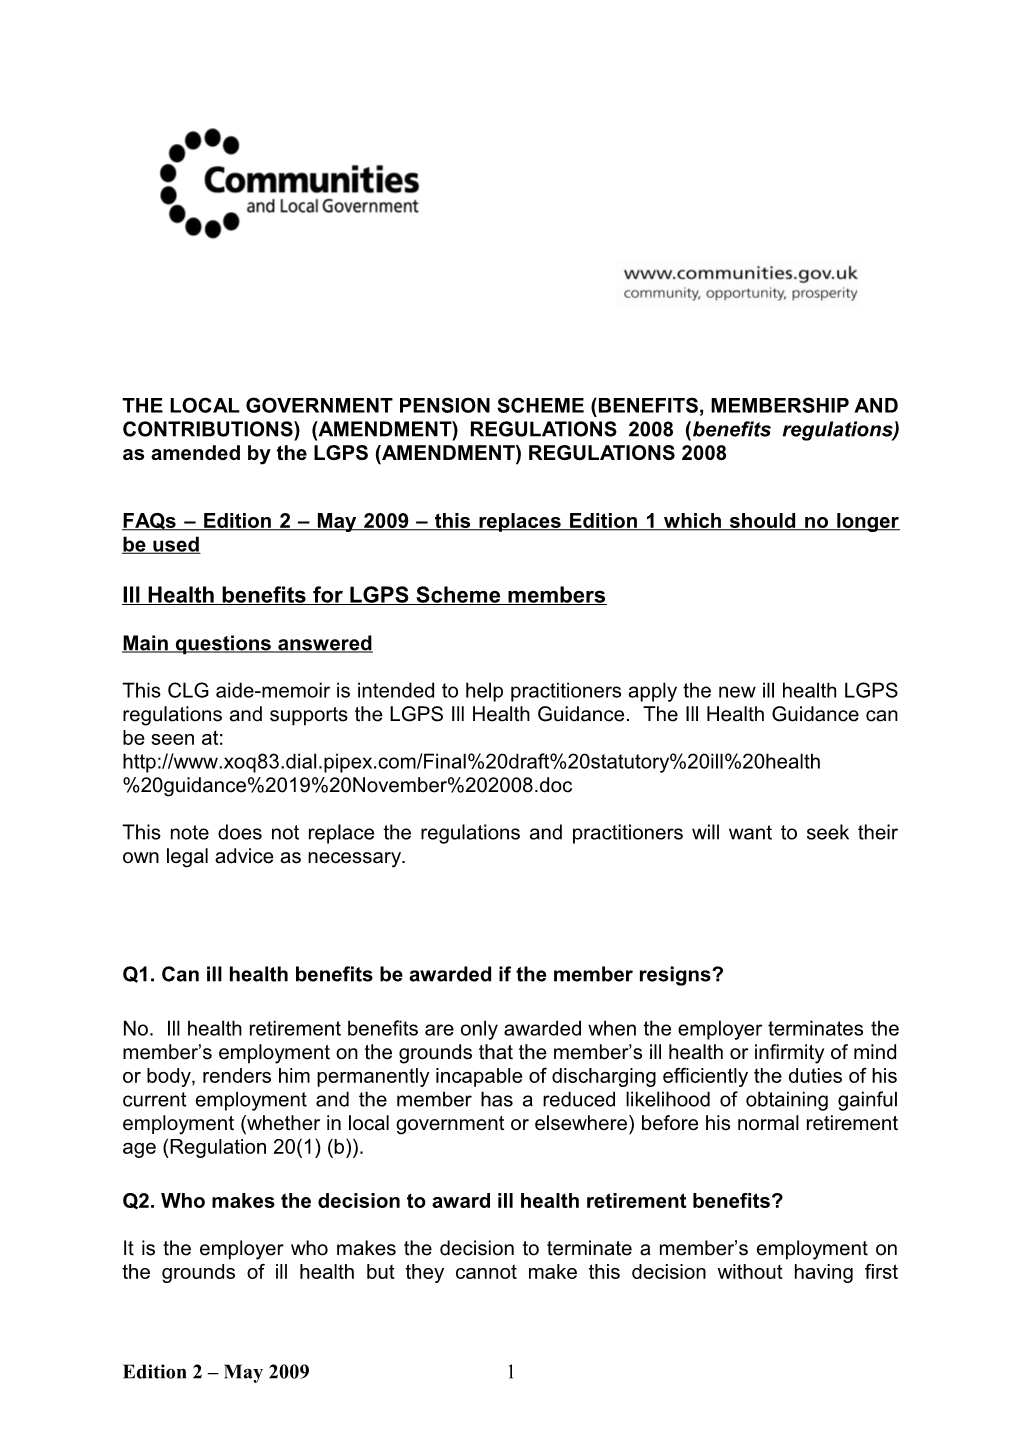 The Local Government Pension Scheme (Benefits, Membership and Contributions) (Amendment)